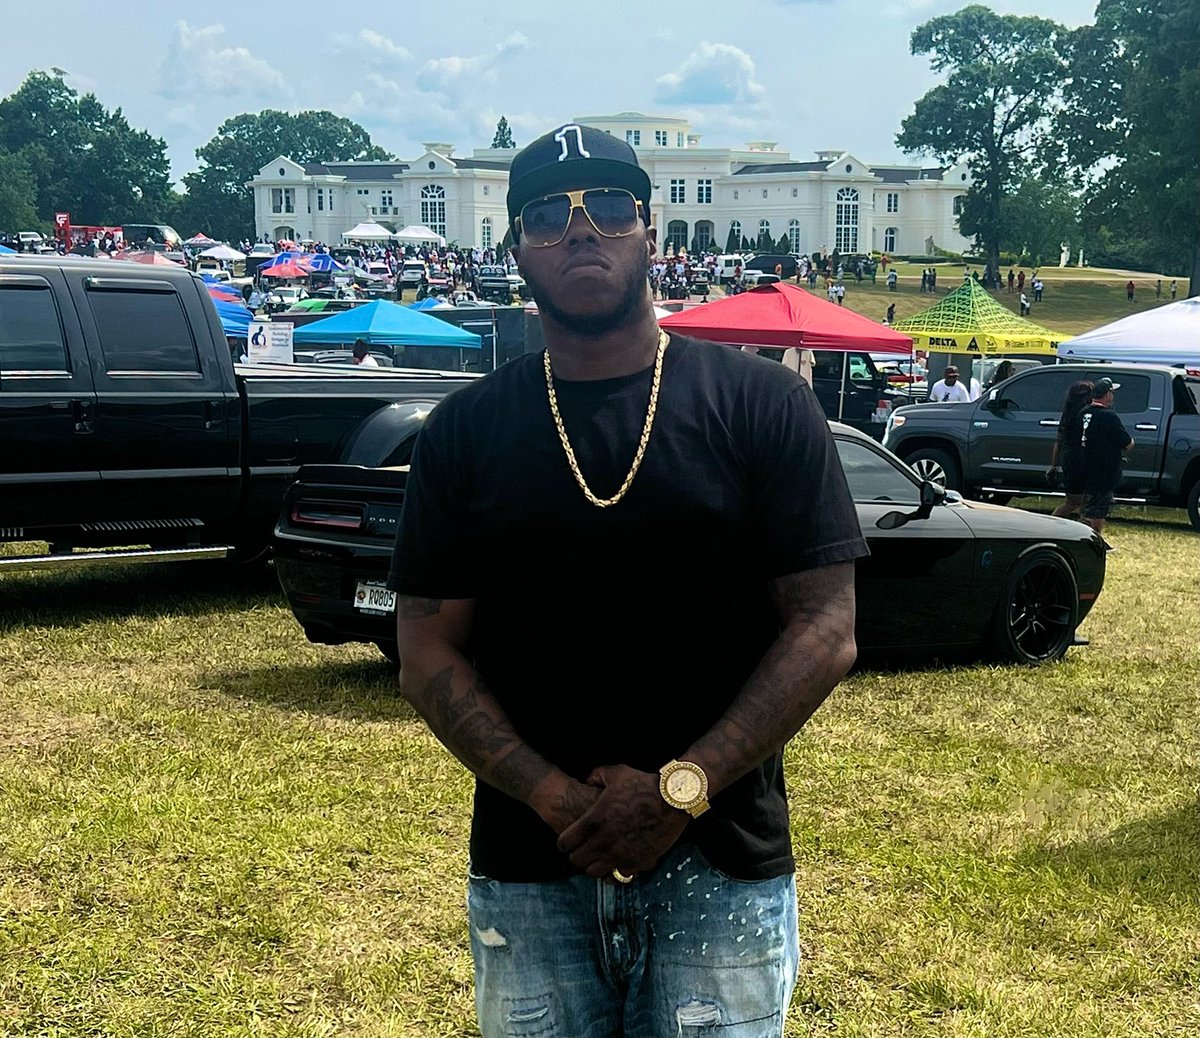 Carshow was dope! Salute @RickRoss #onedeepentertainment #od4l